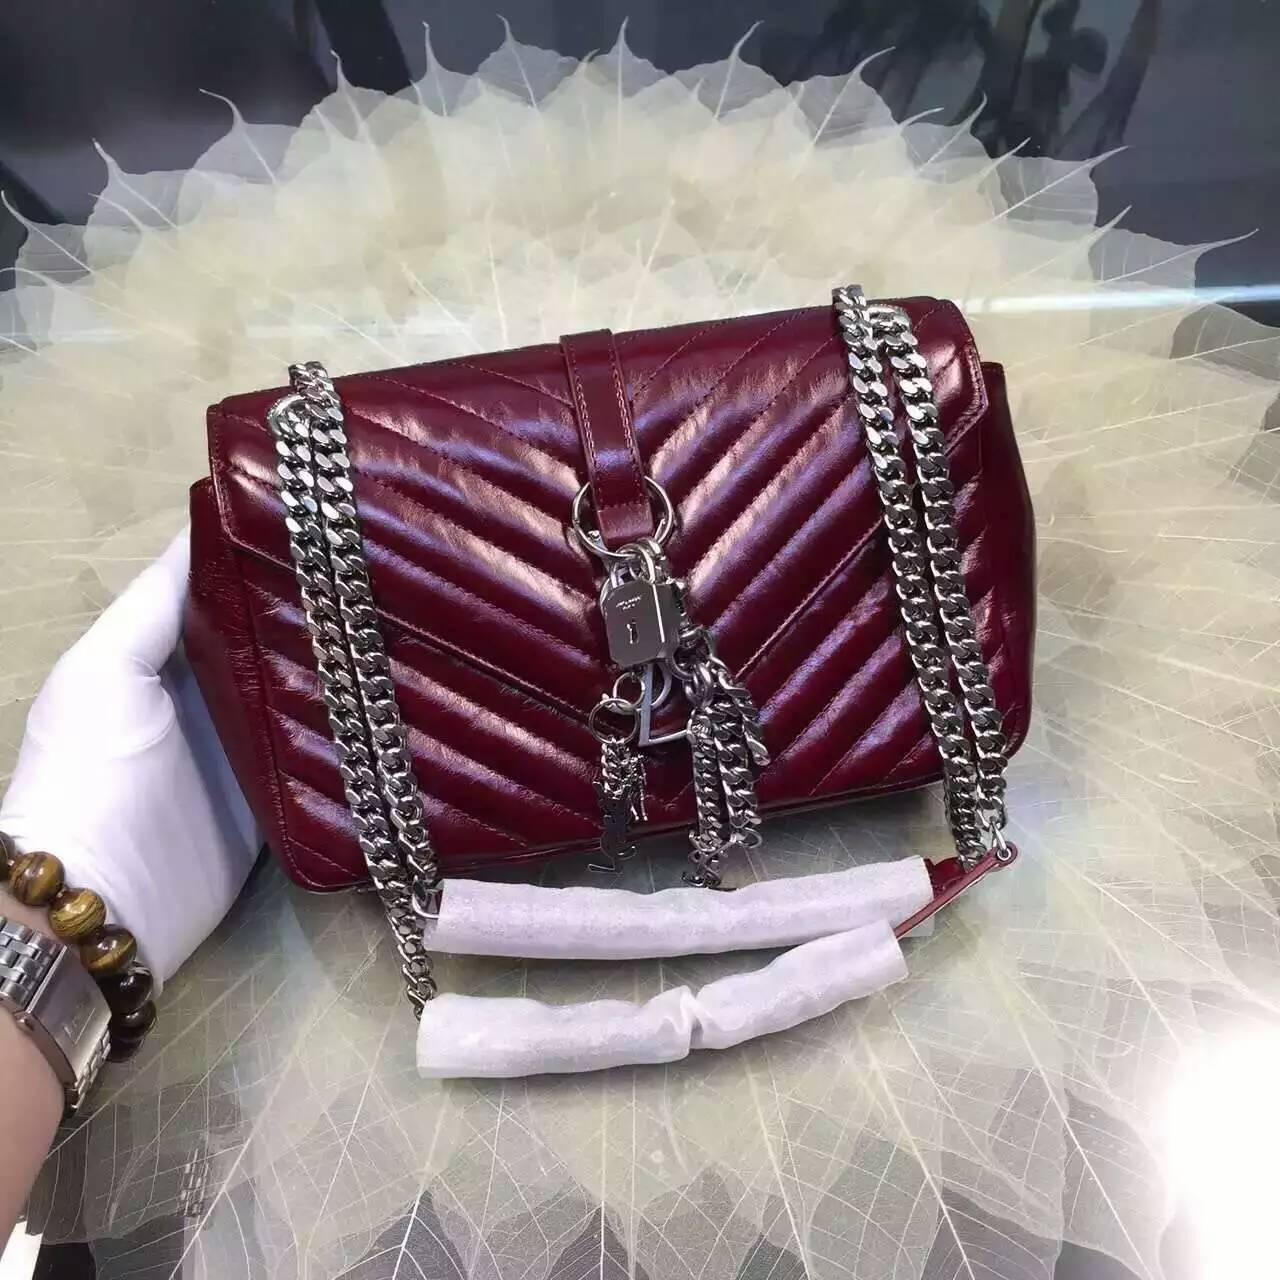 2016 Cheap YSL Out Sale with Free Shipping-Saint Laurent Classic Medium Baby Monogram Satchel in Bordeaux Matelasse Leather Silver